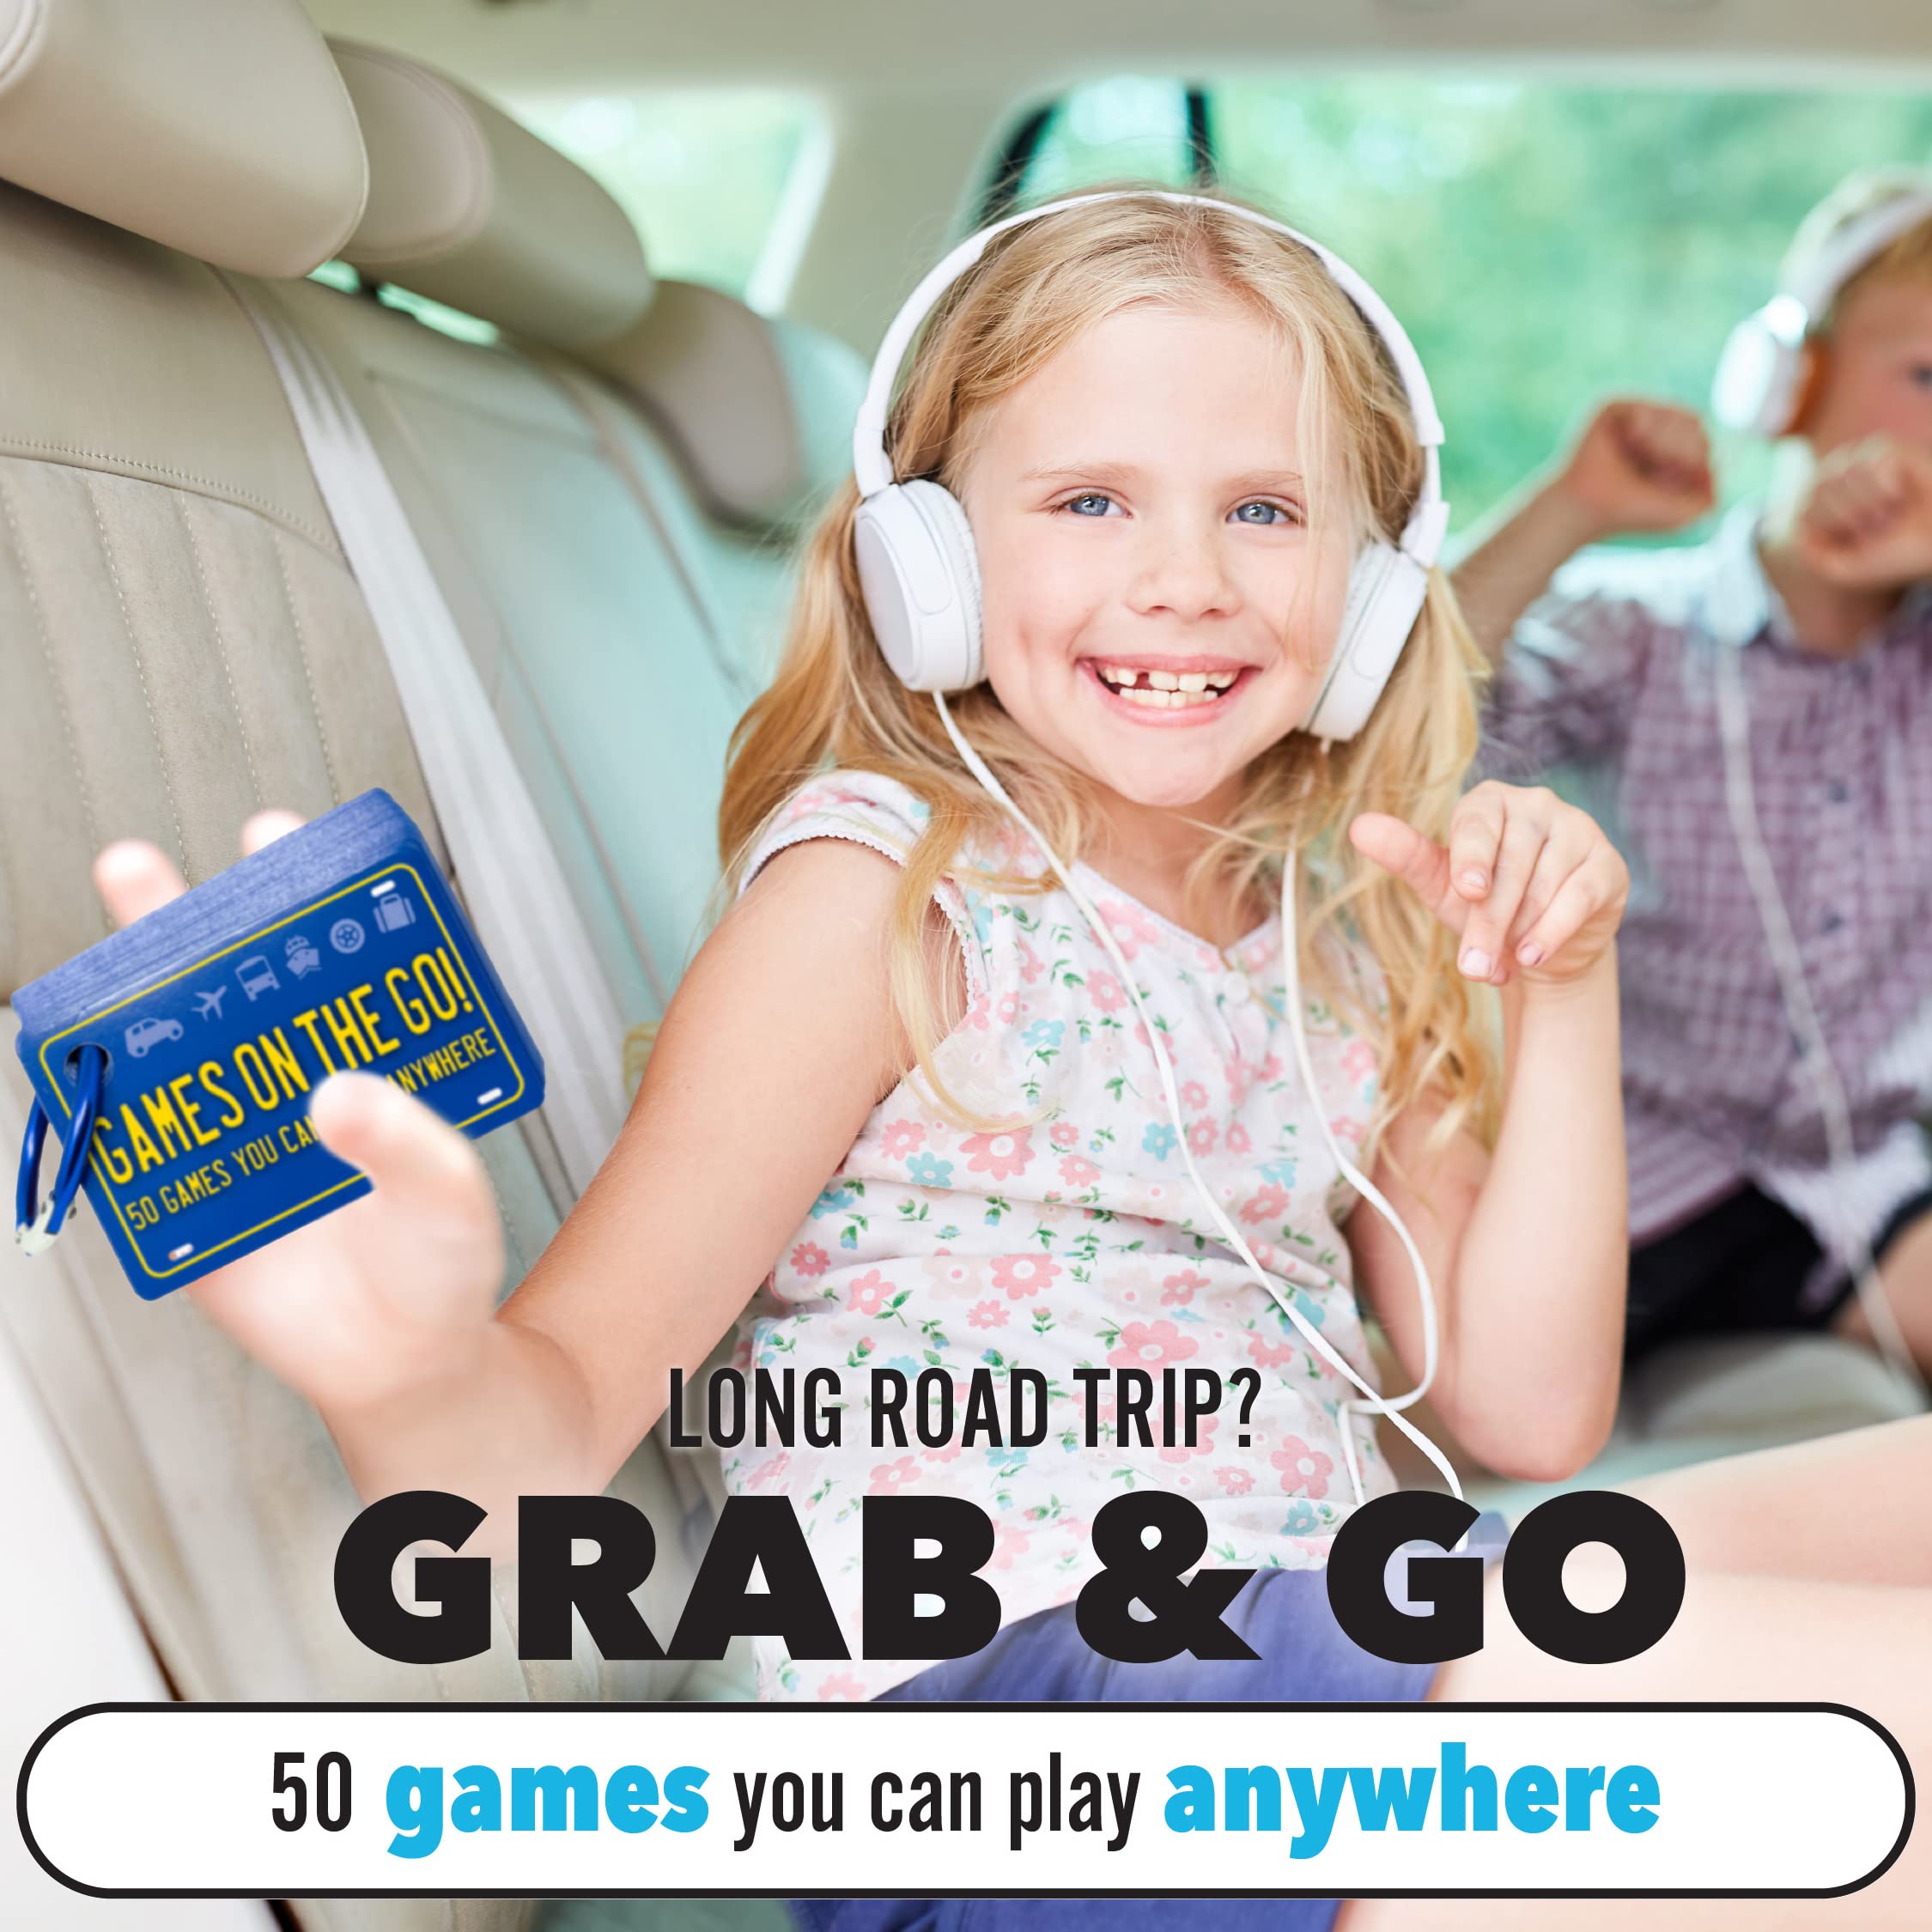 Games on the Go by Continuum Games - Portable Roadtrip Family Games to Challenge and Entertain , Blue